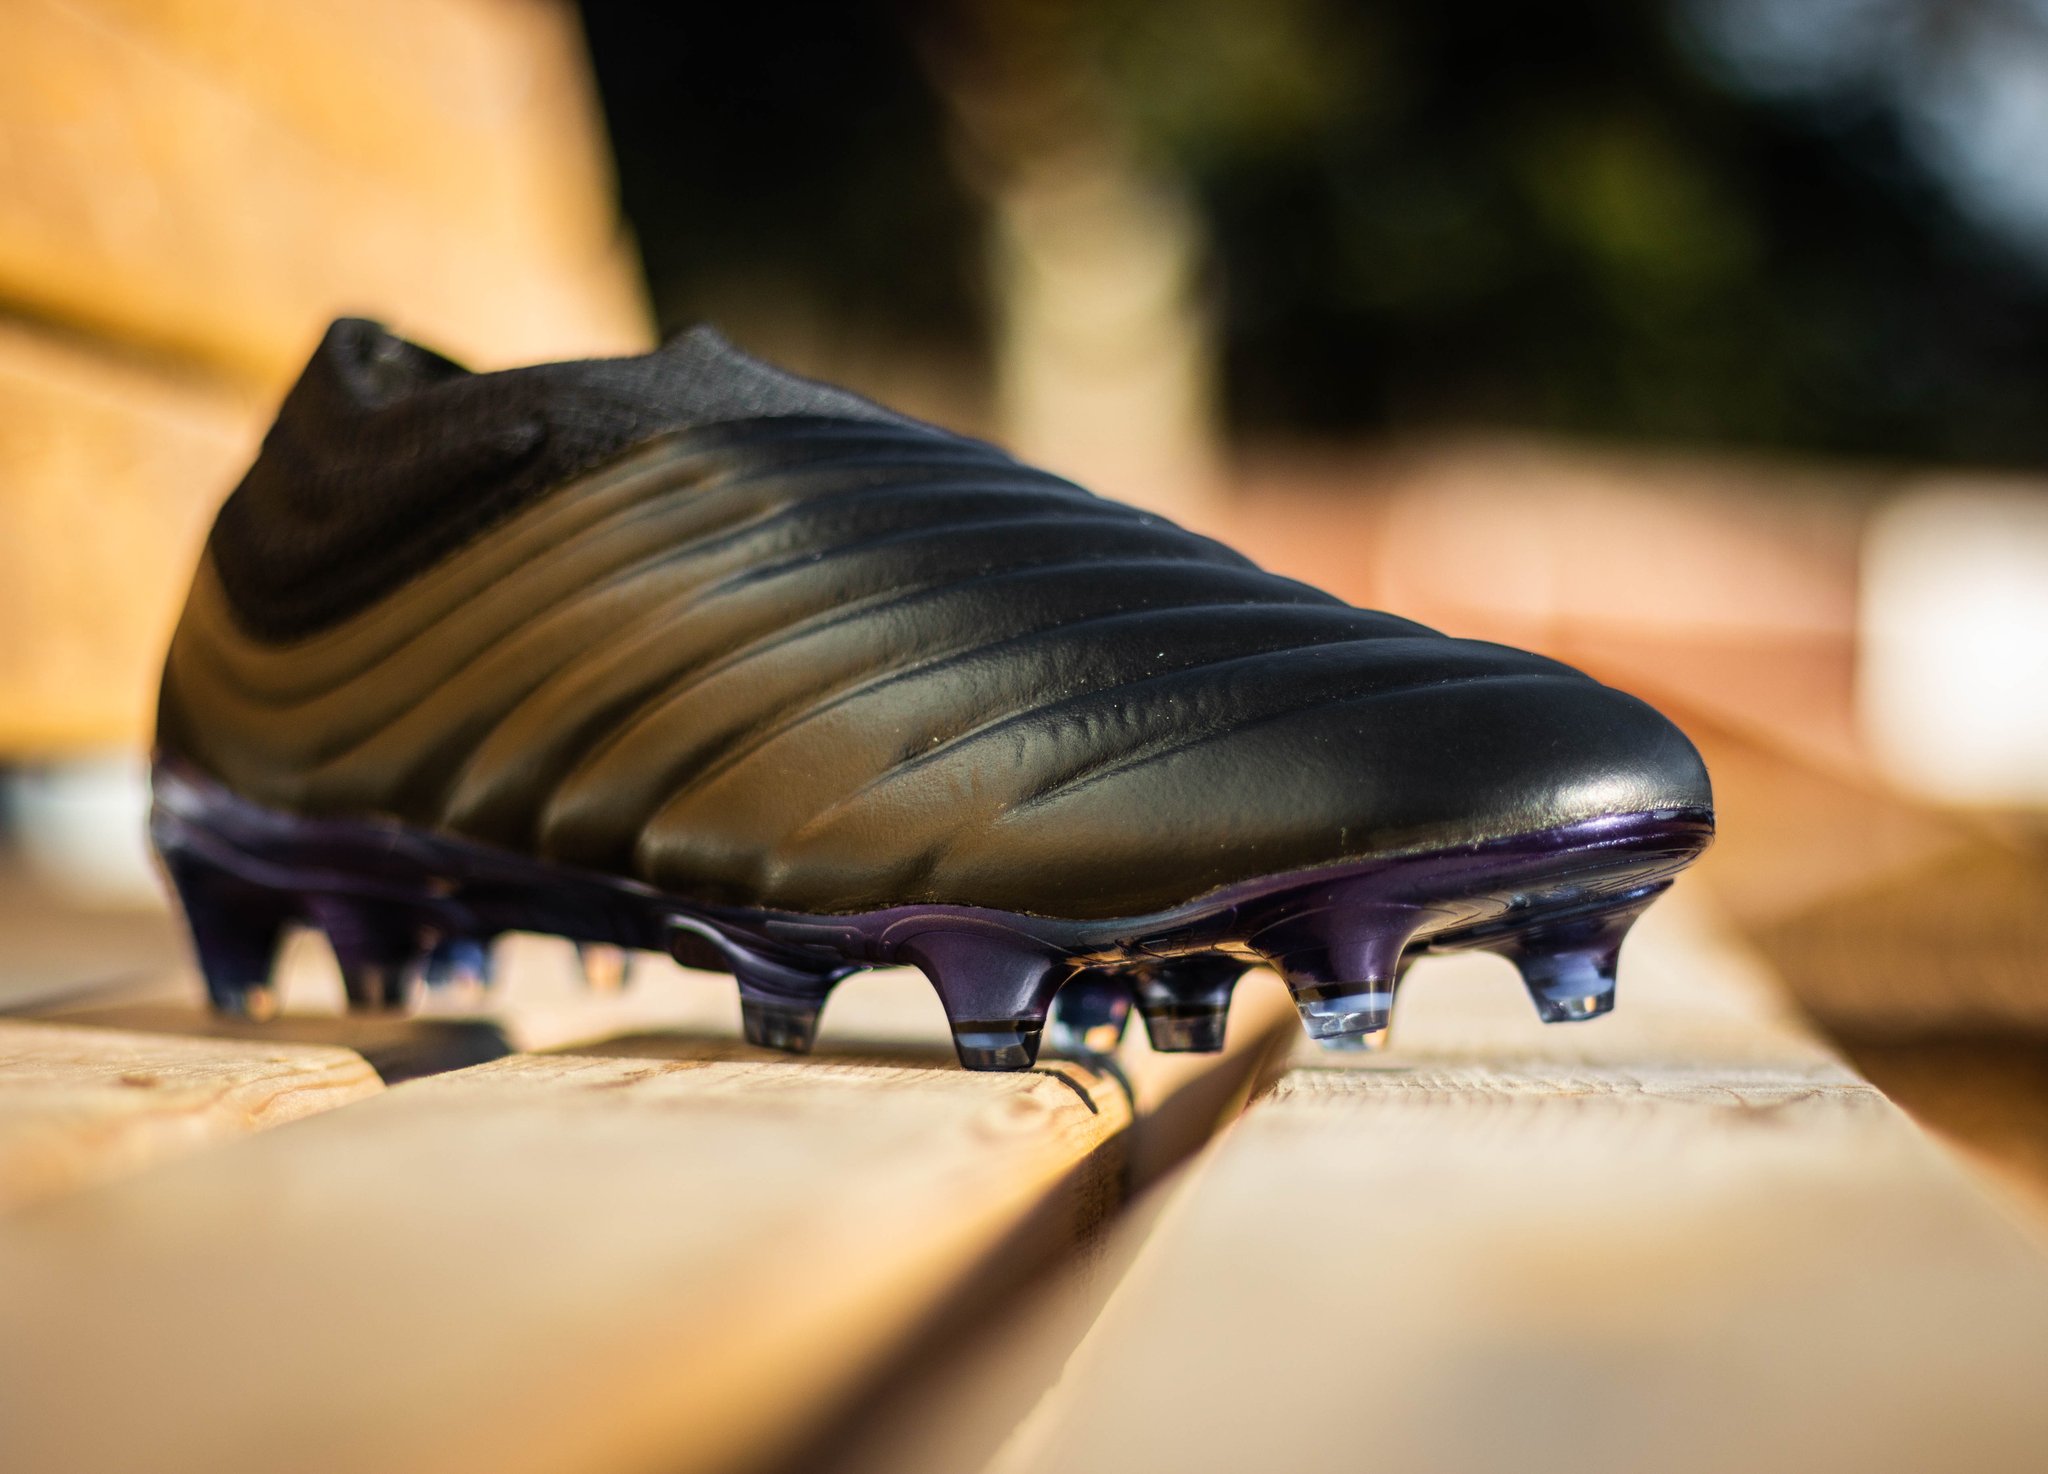 Búho Fotoeléctrico Cabra Soccer Express 🇨🇦 on Twitter: "Lace-less Leather The next generation  adidas Copa 19+ FG boot is available in store and online at #SoccerX 🔗  https://t.co/KMR2ZOl9bS @adidasca #copa19 #adidascleats #adidasArchetic  https://t.co/5x9AIB3CVW" / Twitter